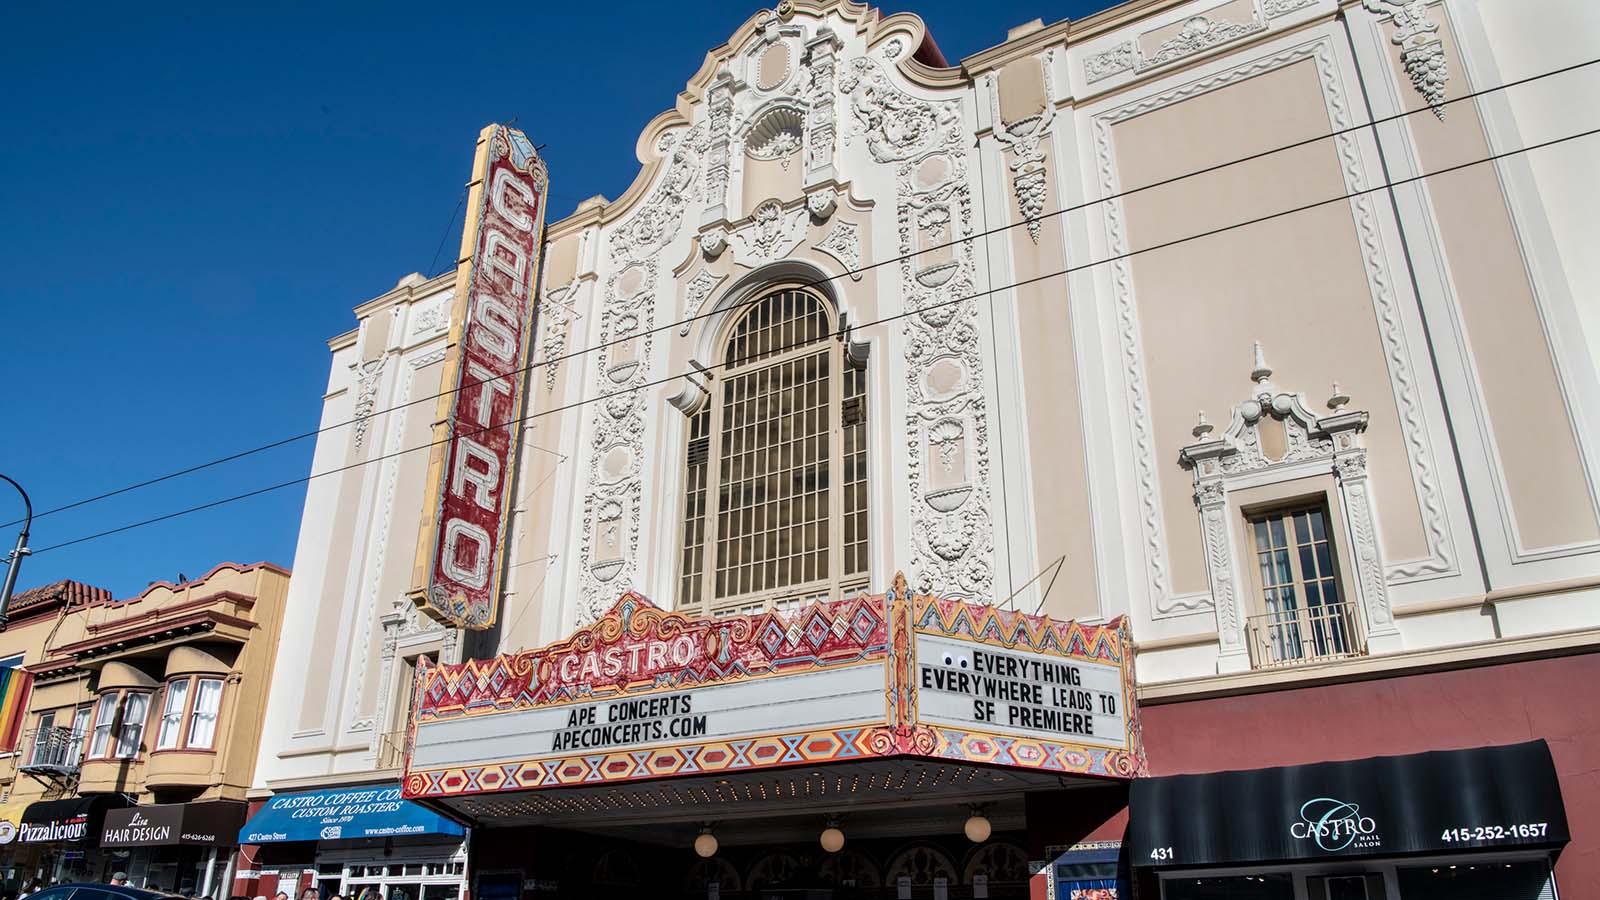 Meyer Sound and UltraSound Tapped to Provide Audio Systems for Iconic Castro Theatre